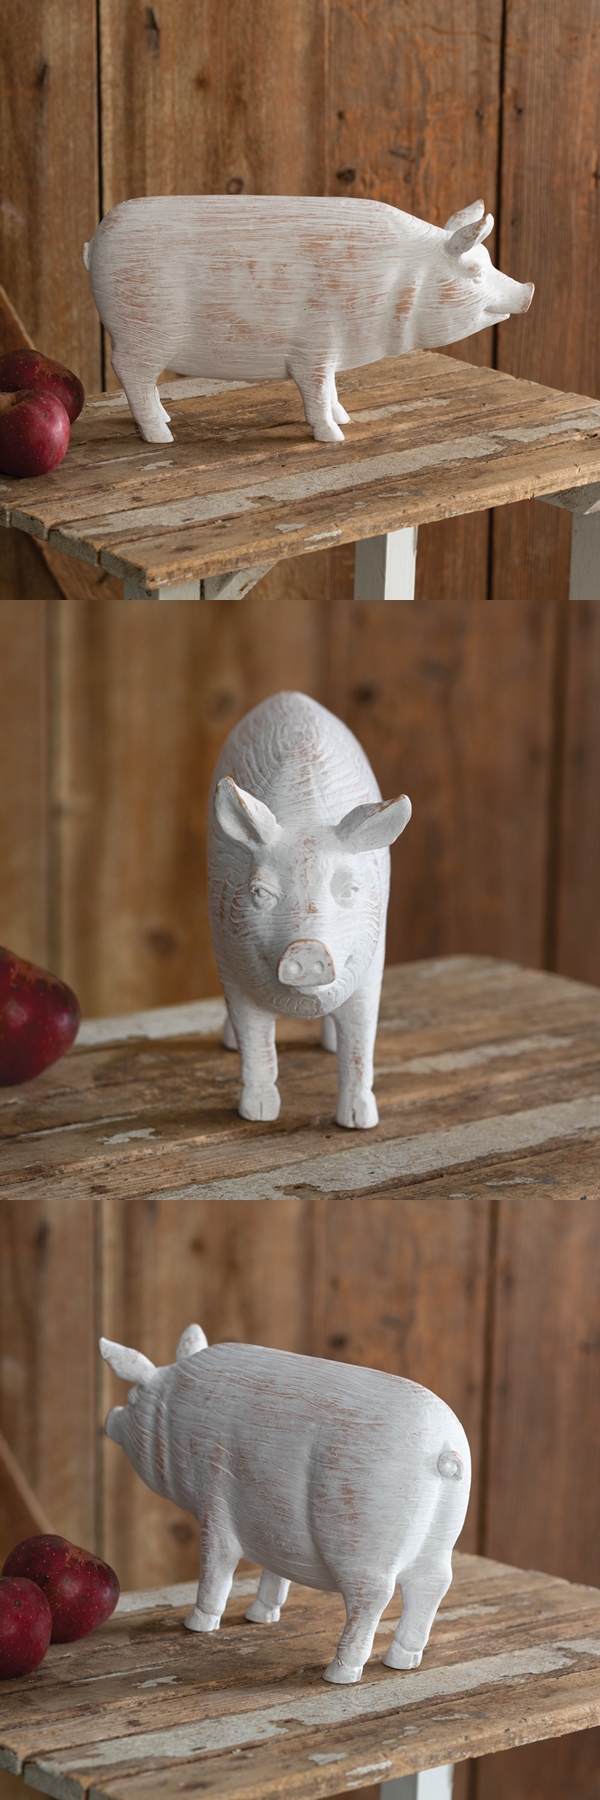 CTW Home Collection Distressed-Finish Farmhouse Tabletop Pig Figurine